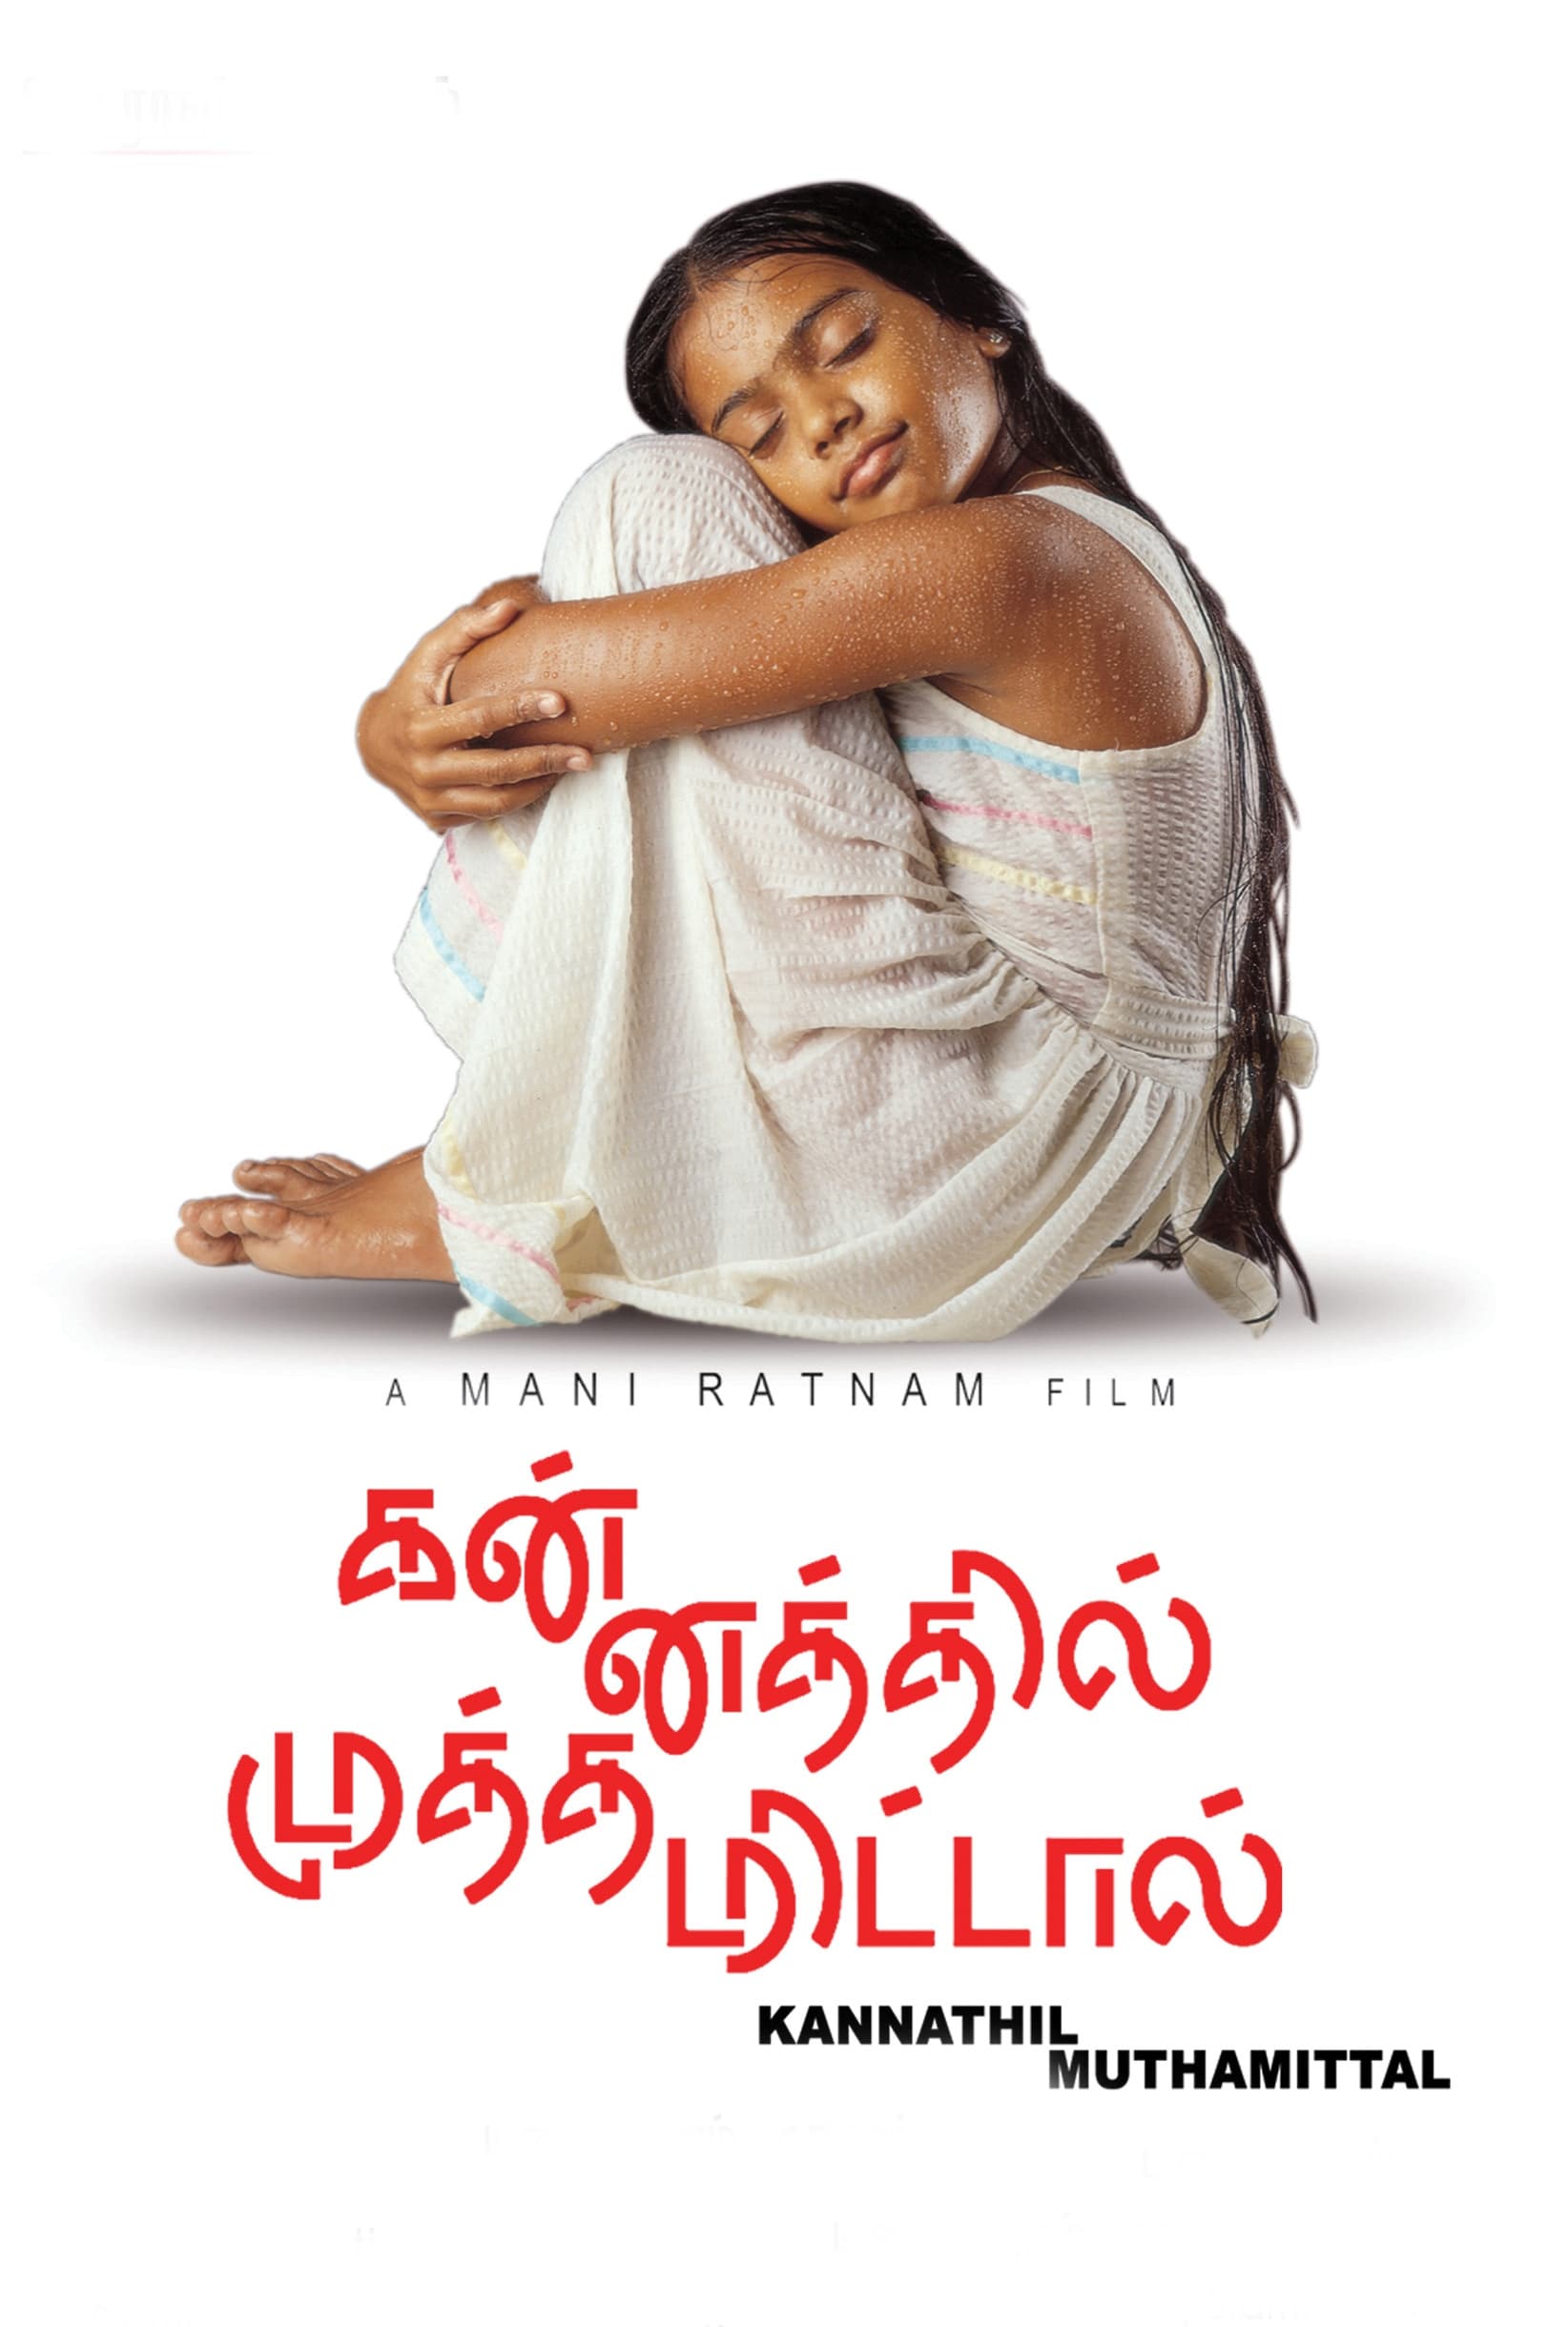 A Mani Ratnam film which me cry